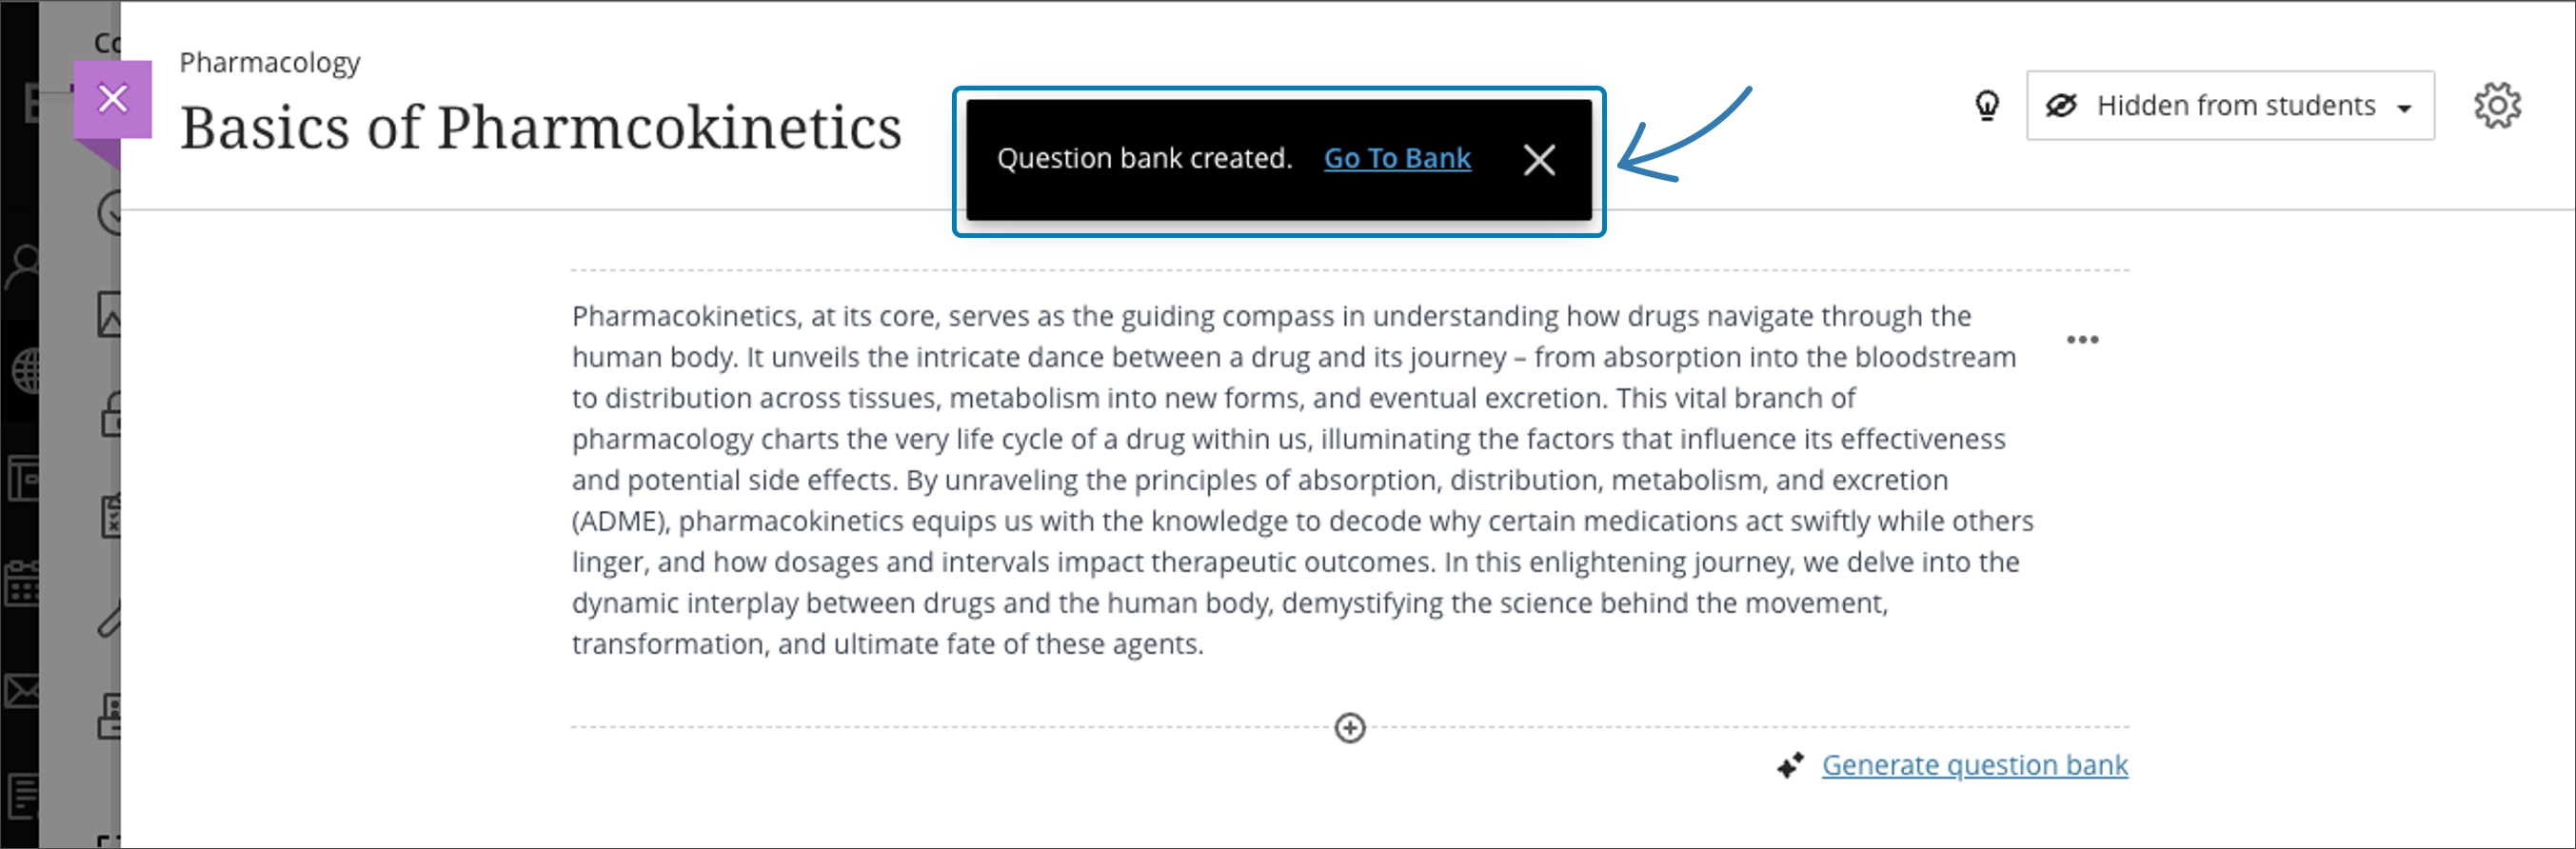 Confirmation that the question bank creation with an option to navigate to the bank